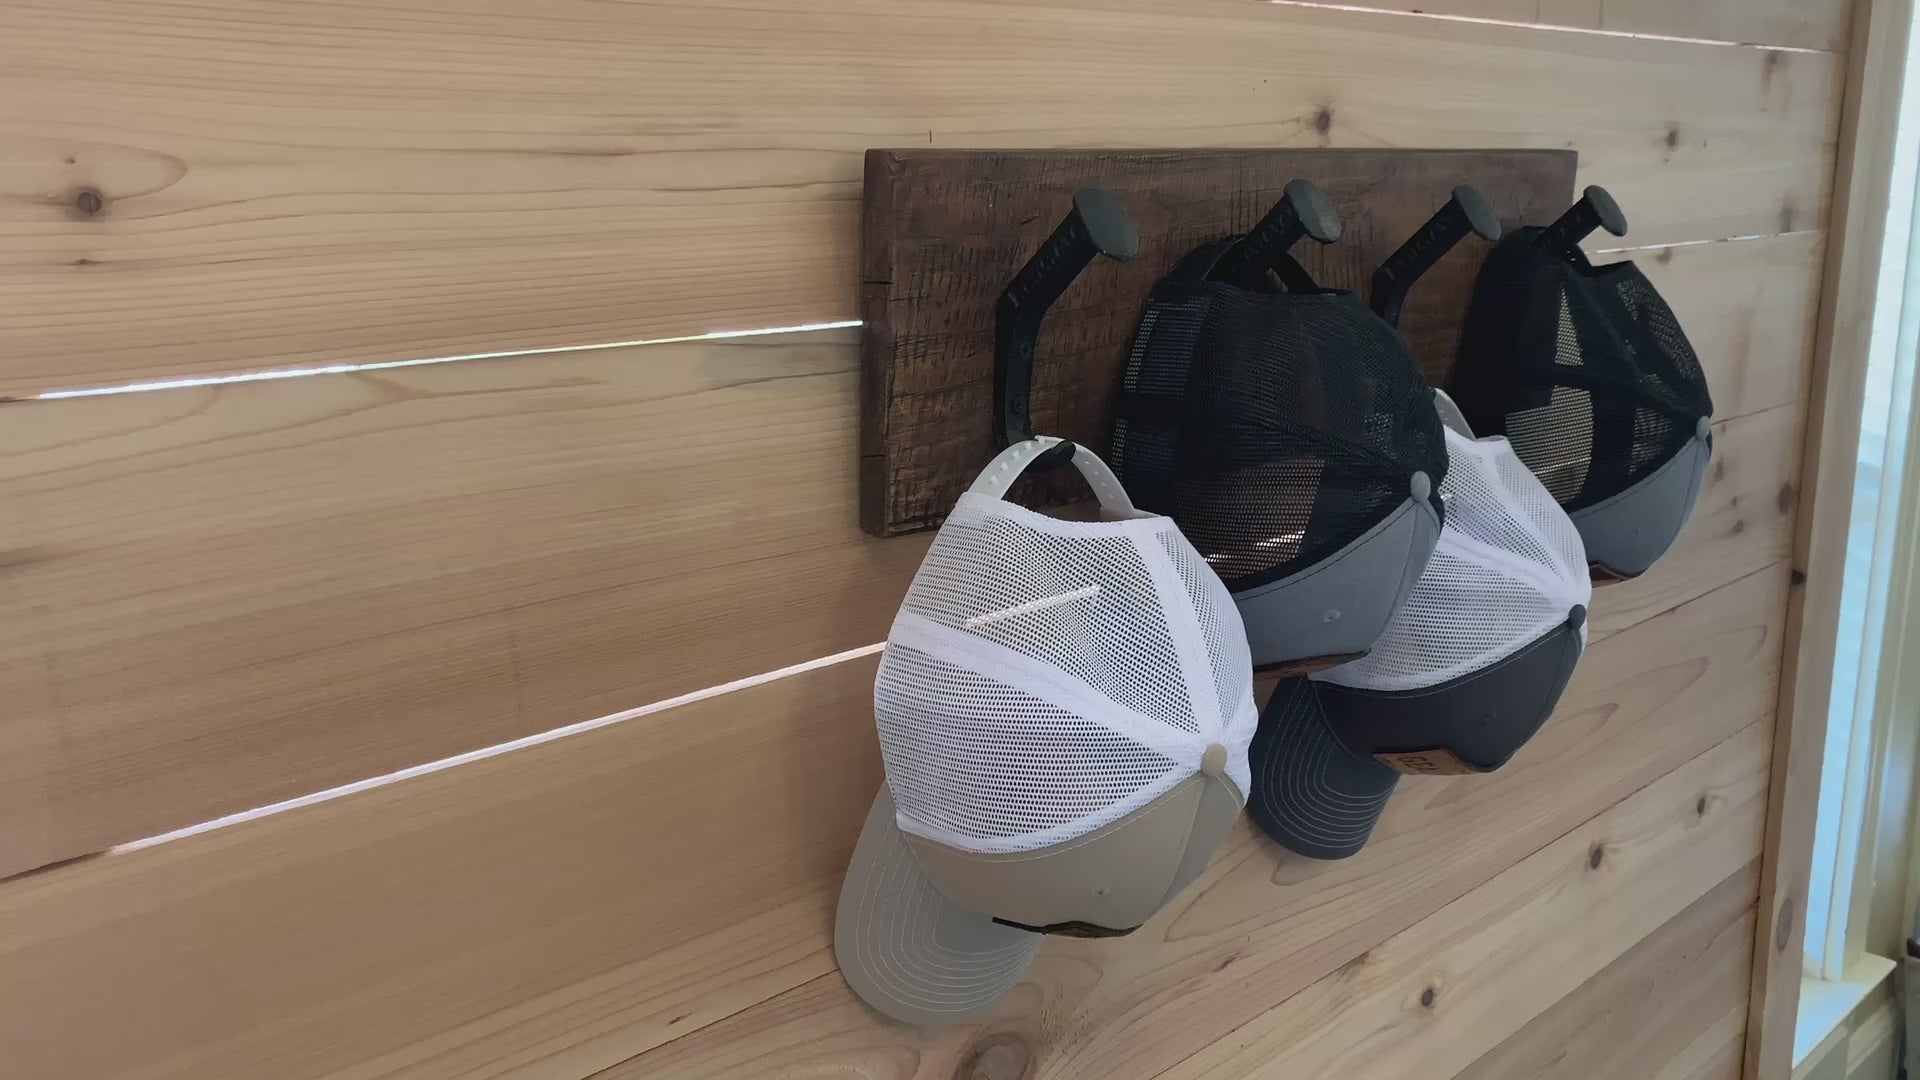 Handcrafted Rustic Farmhouse Wooden Hat Rack - 4 Hanger – Magnolia